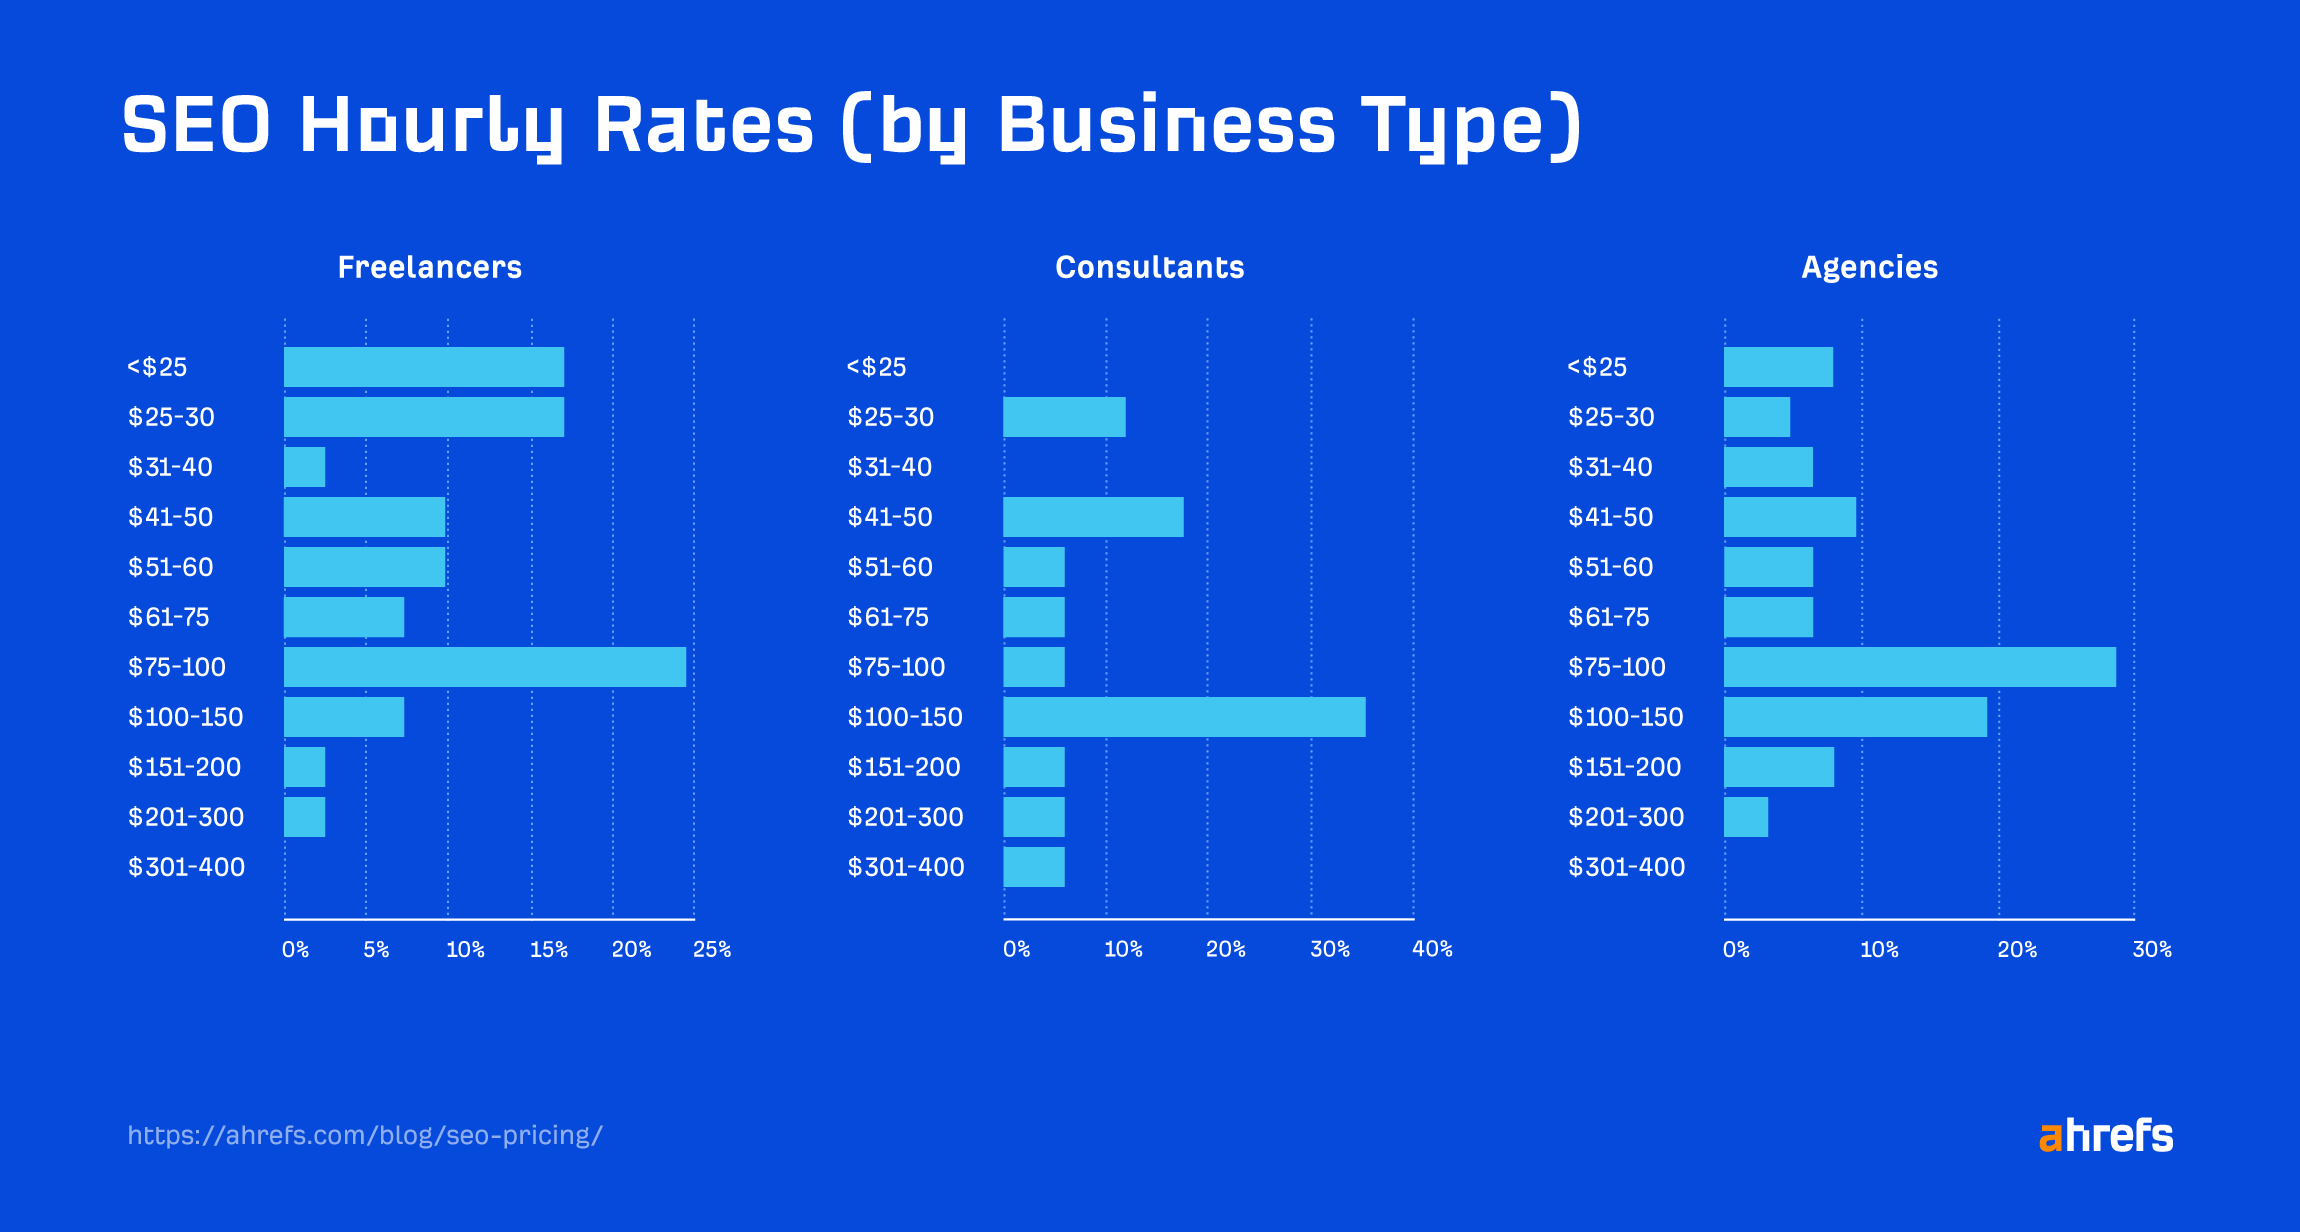 SEO hourly rates by business type.